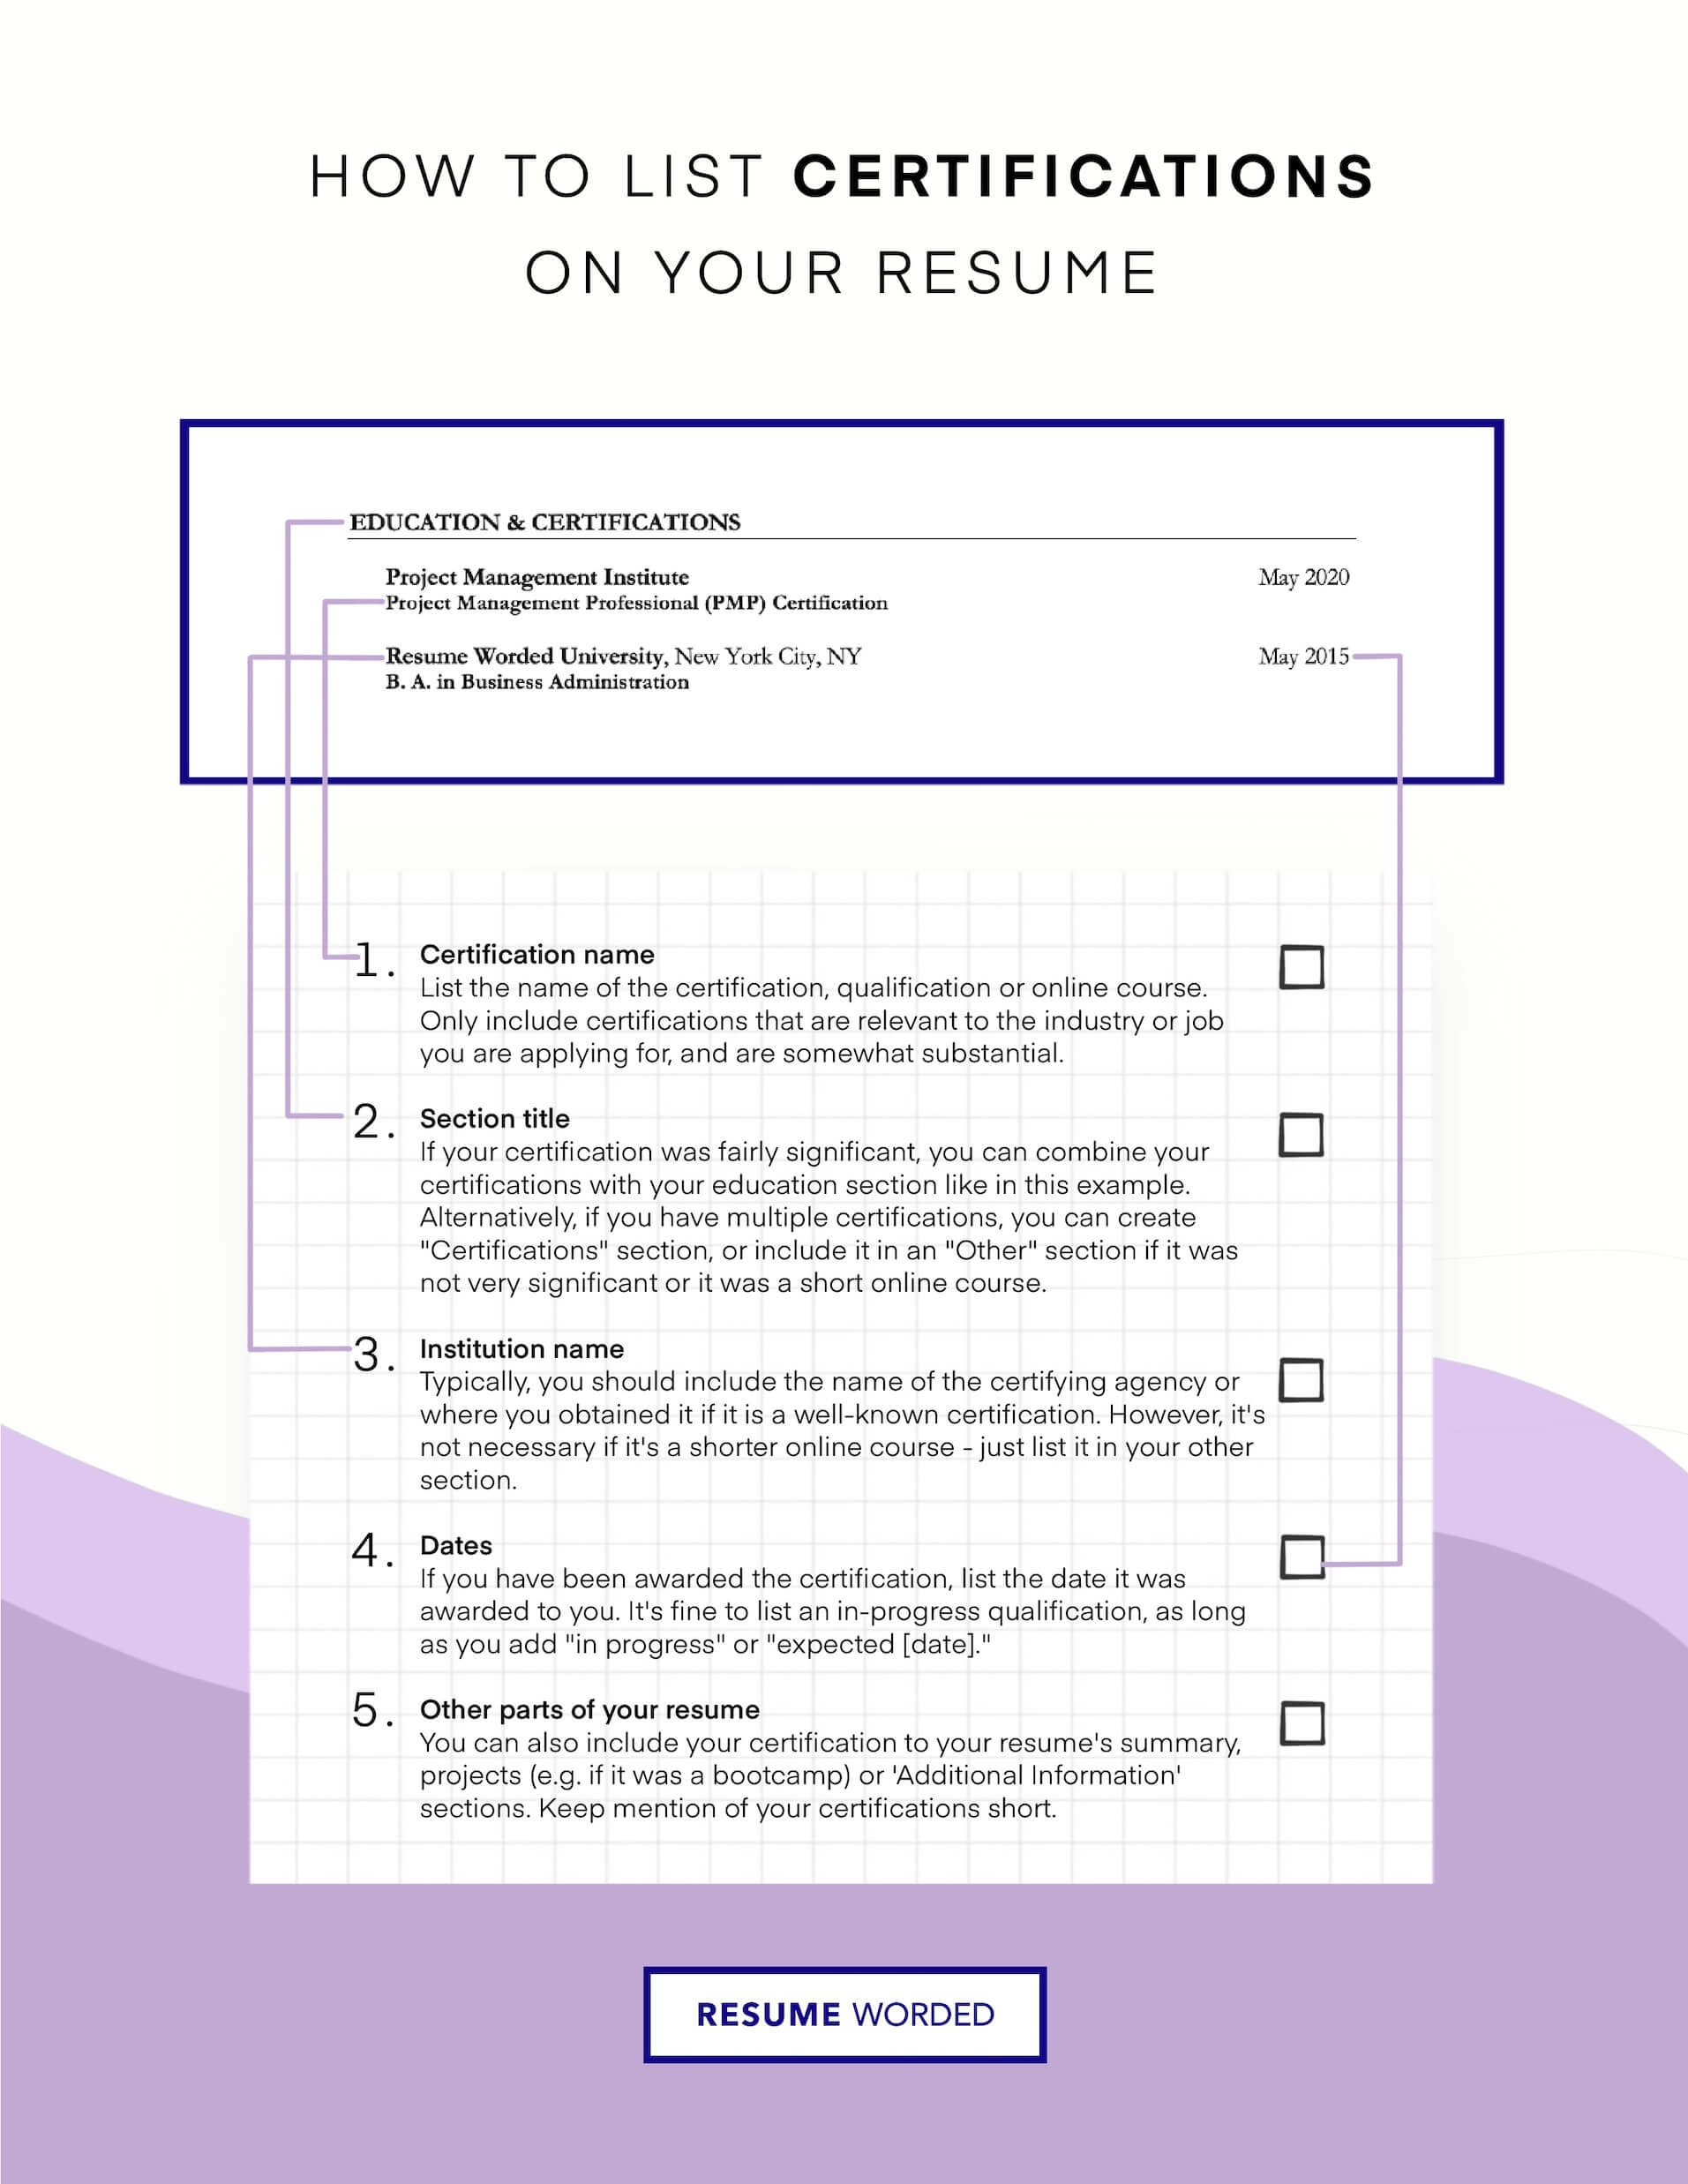 How to list a Google Certificate on your resume